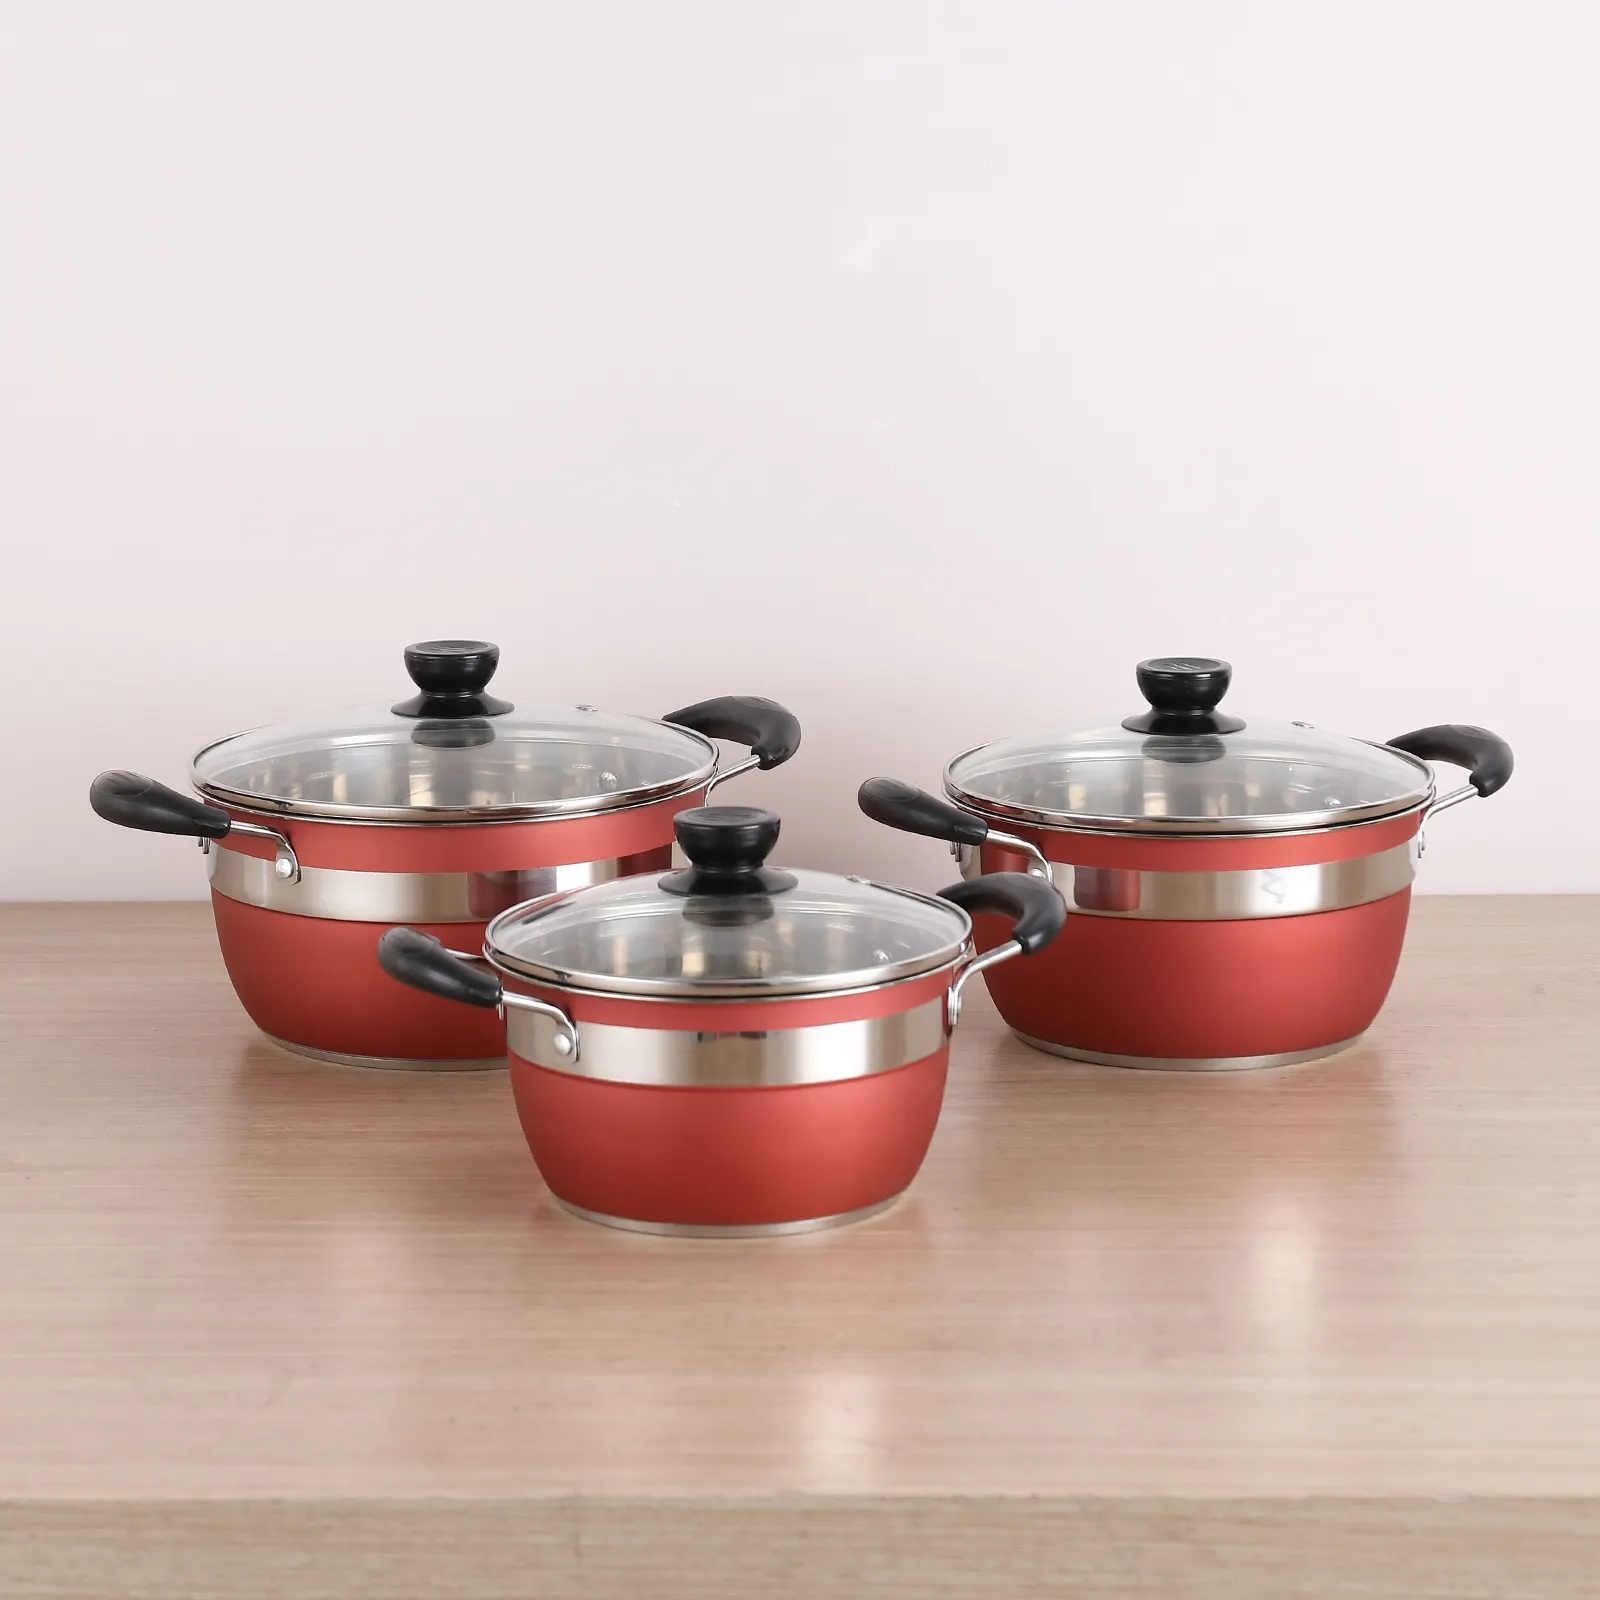 Hot Sell High Quality 6 Pcs Stainless steel double bottom multi-purpose pot Cookware Sets